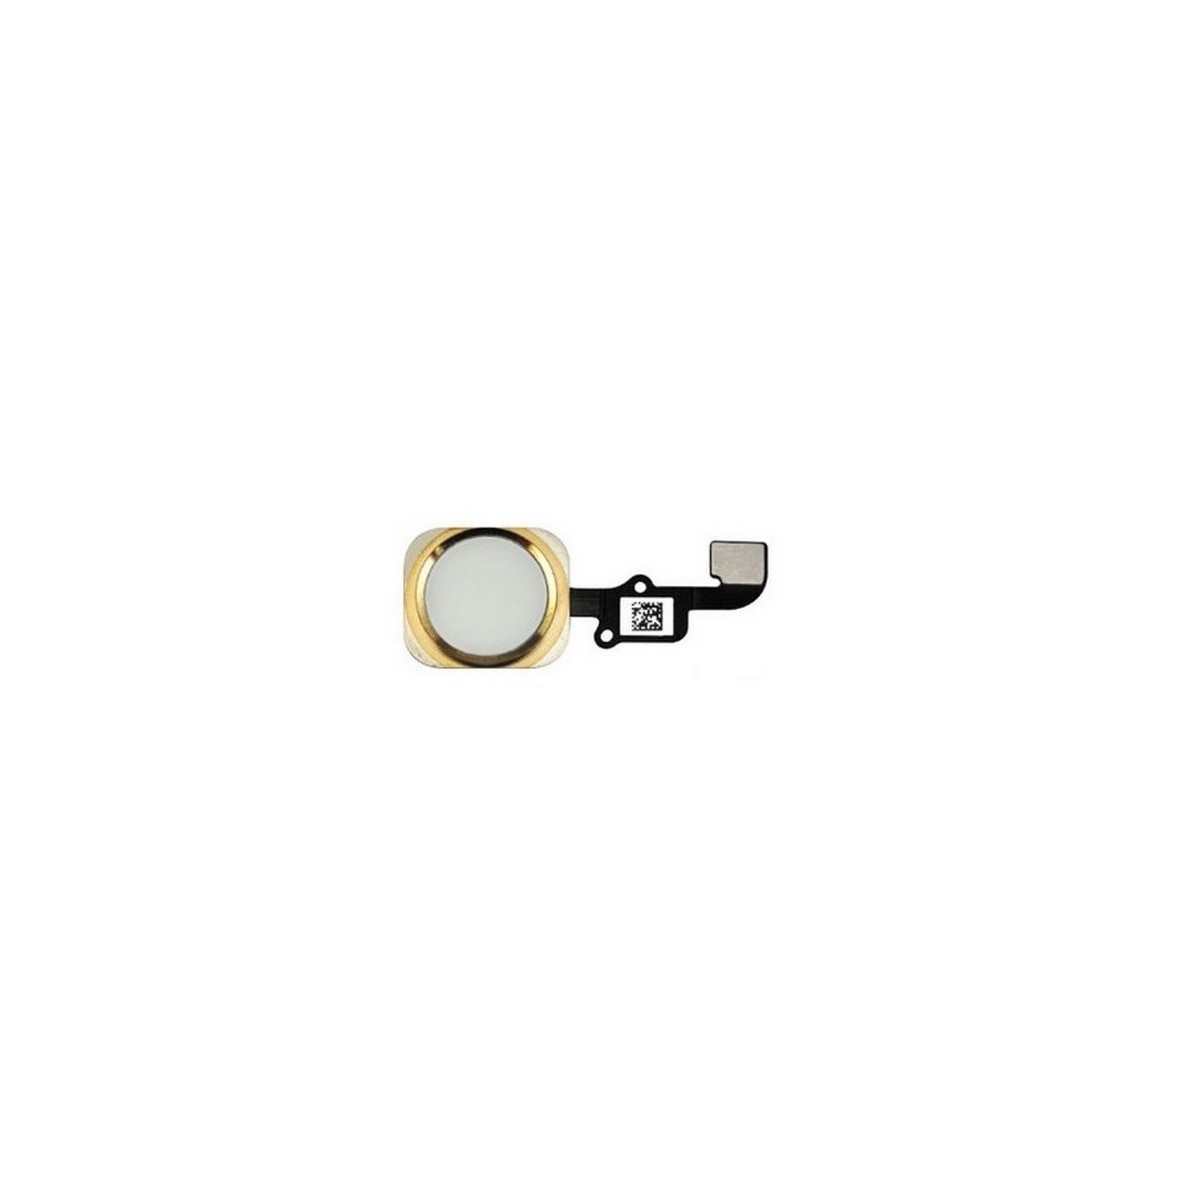 BOUTON HOME + NAPPE POUR IPHONE 6 BLANC-OR